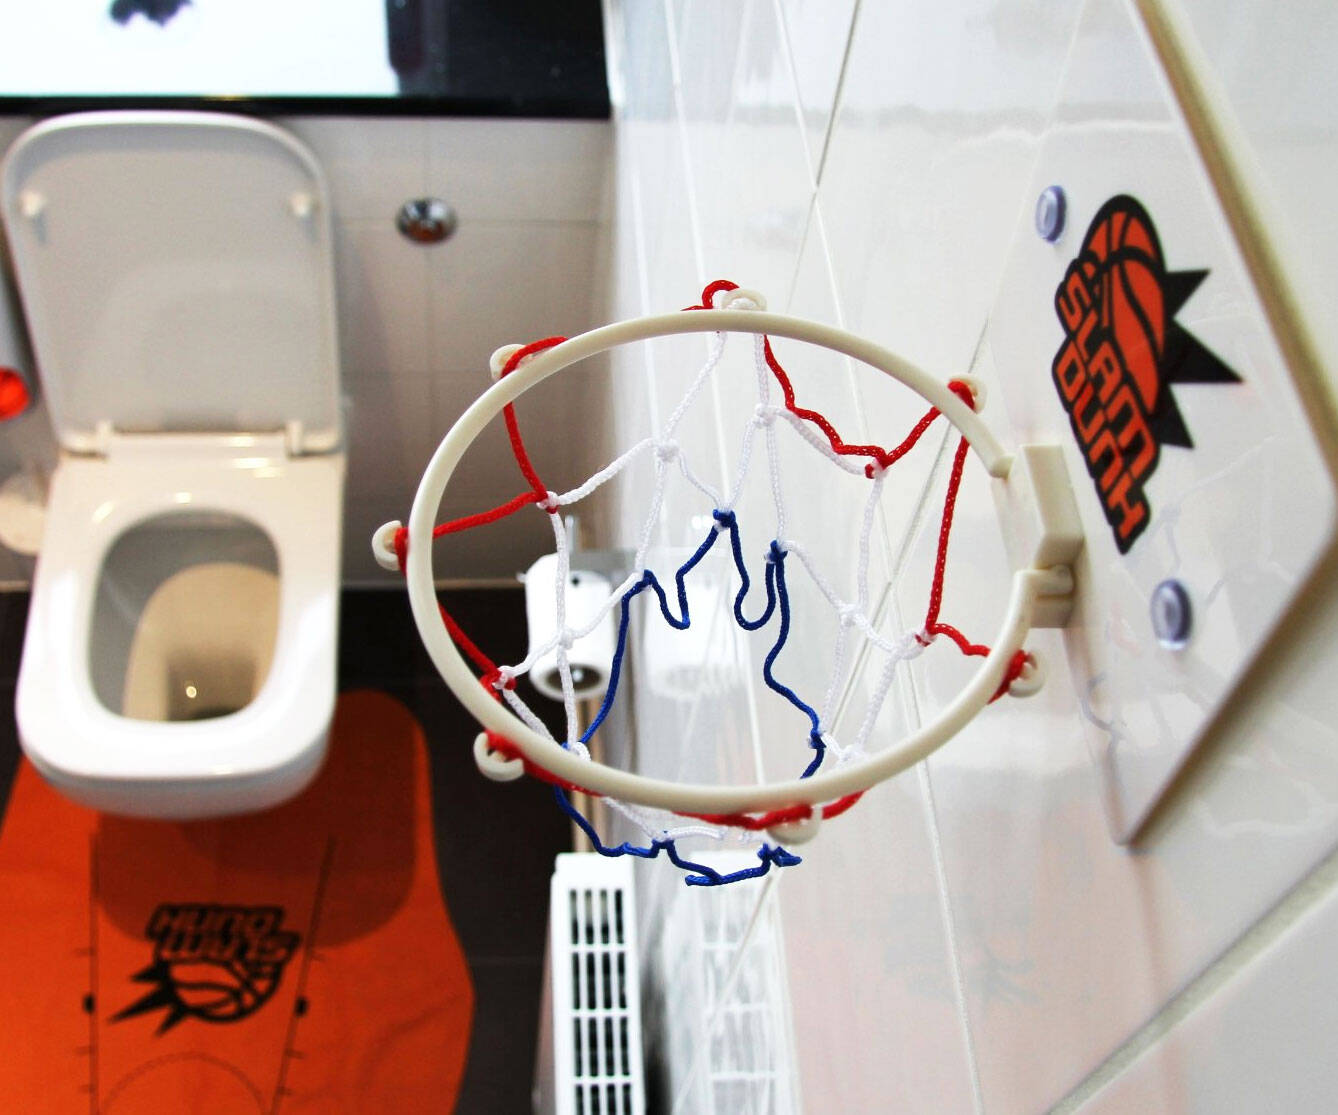 Toilet Basketball Set - //coolthings.us